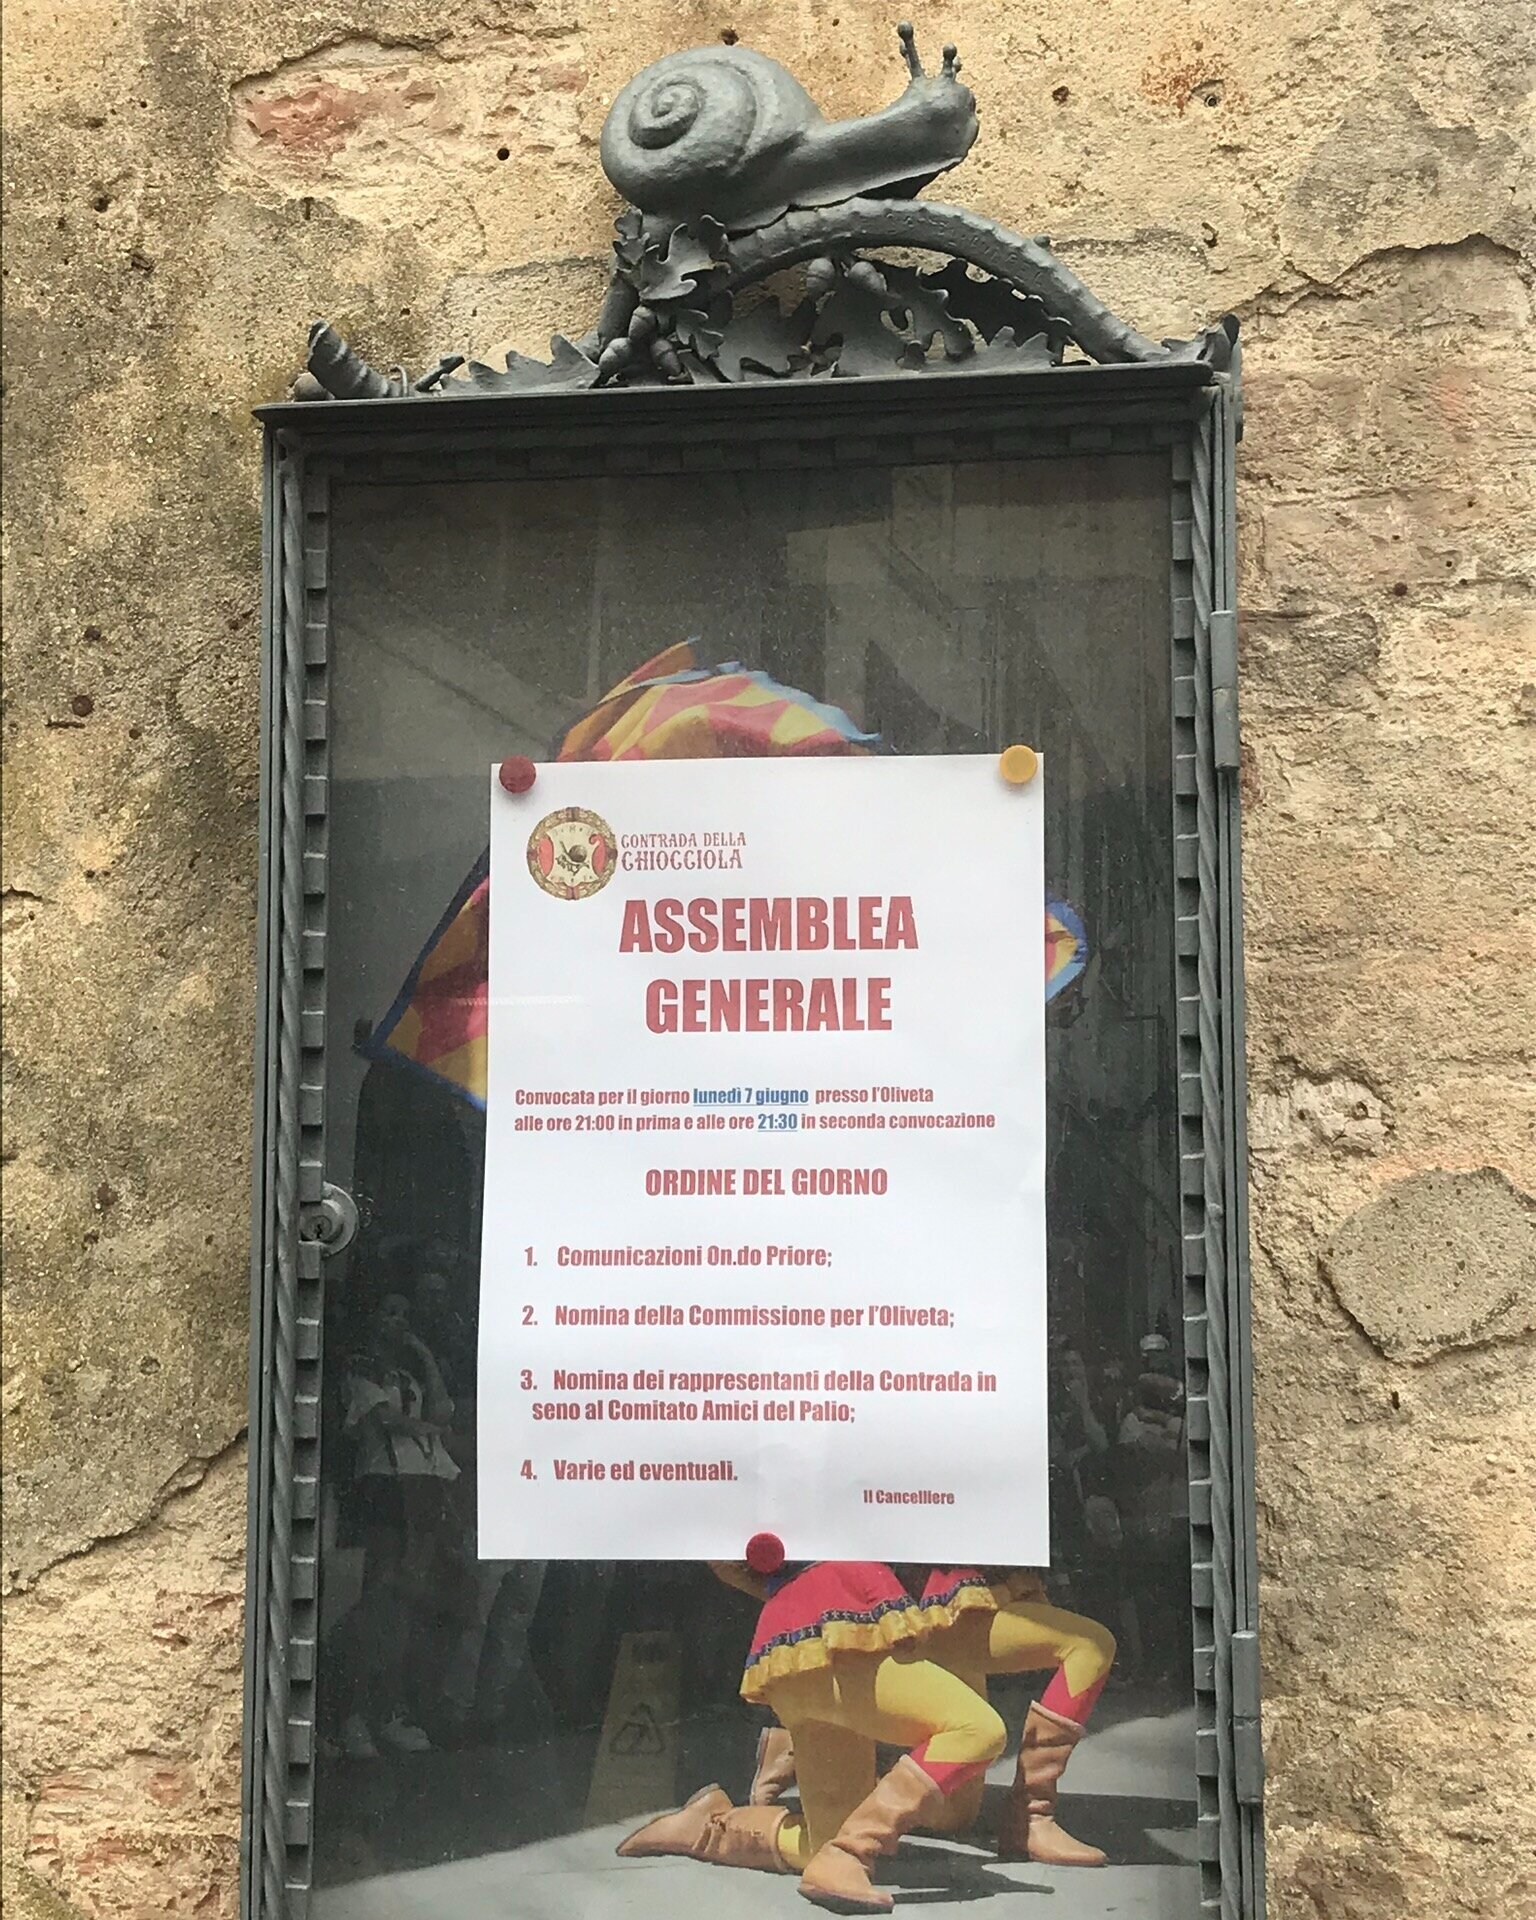  SIENA, Italy. June 4th, 2021. PICTURED: The small details that alert the traveler to the uniqueness of Siena, as a flyer advertising a general meeting of one of the contrada sits on the side of the street. 